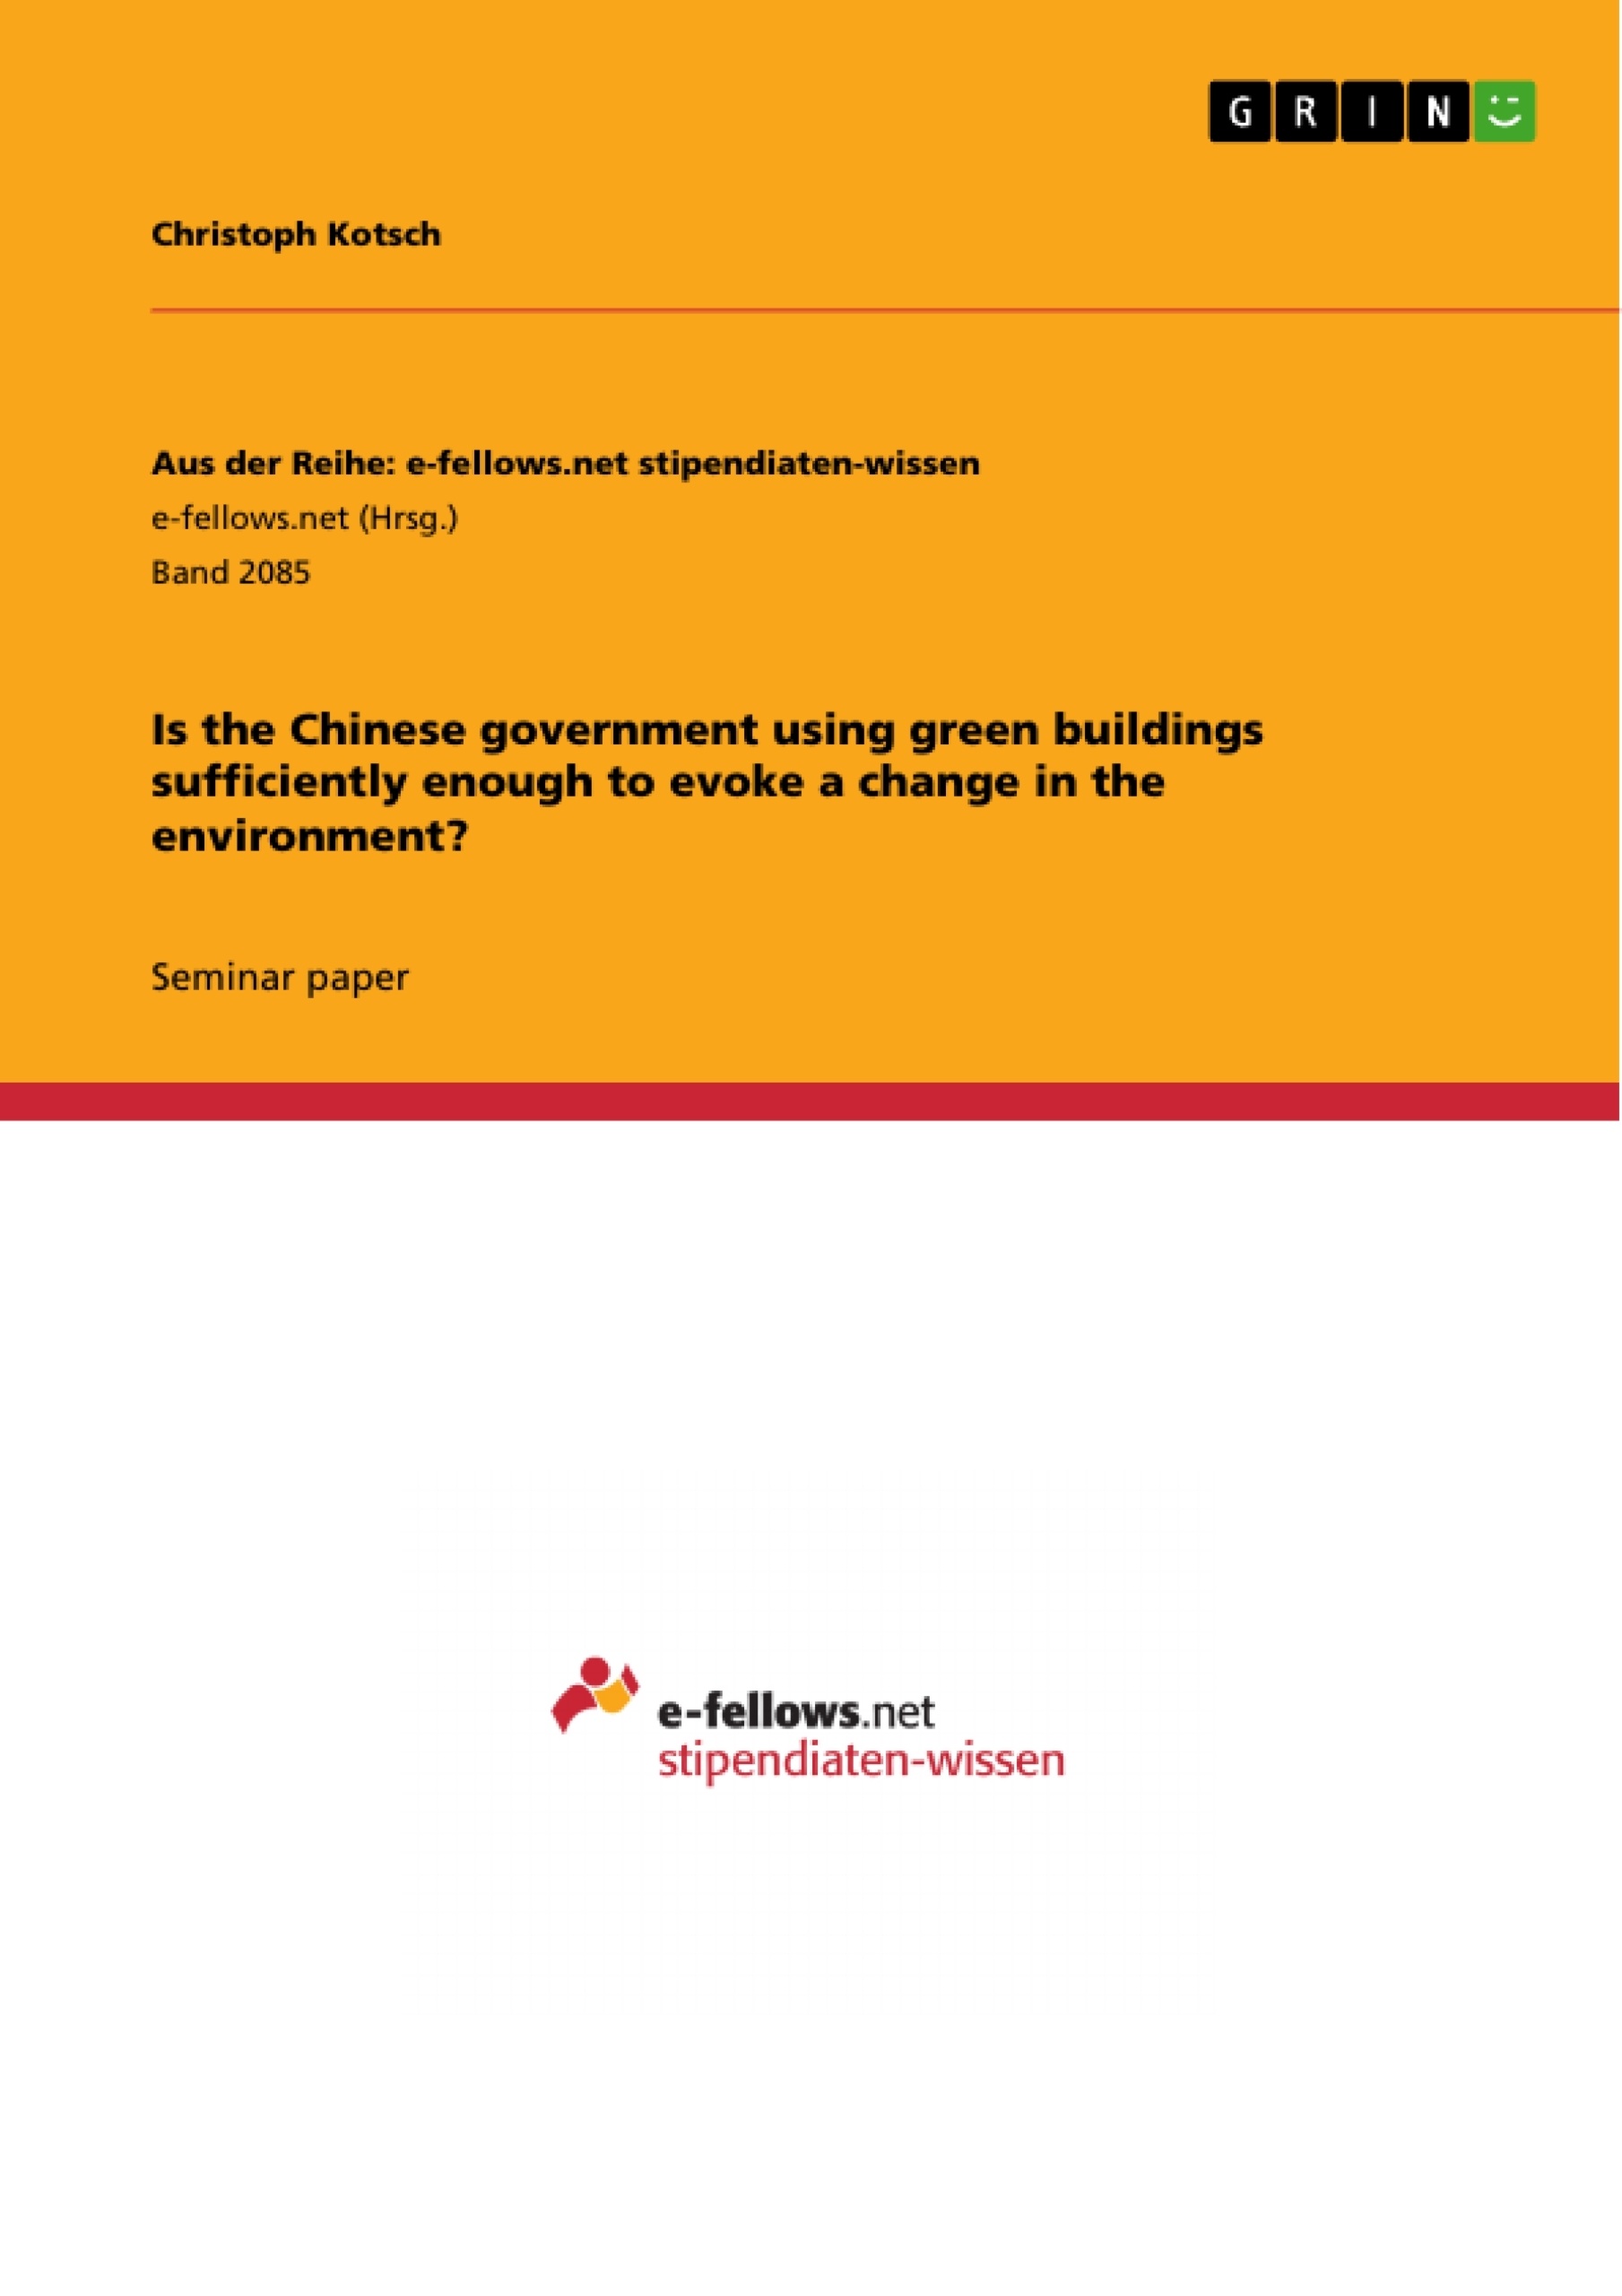 Title: Is the Chinese government using green buildings sufficiently enough to evoke a change in the environment?